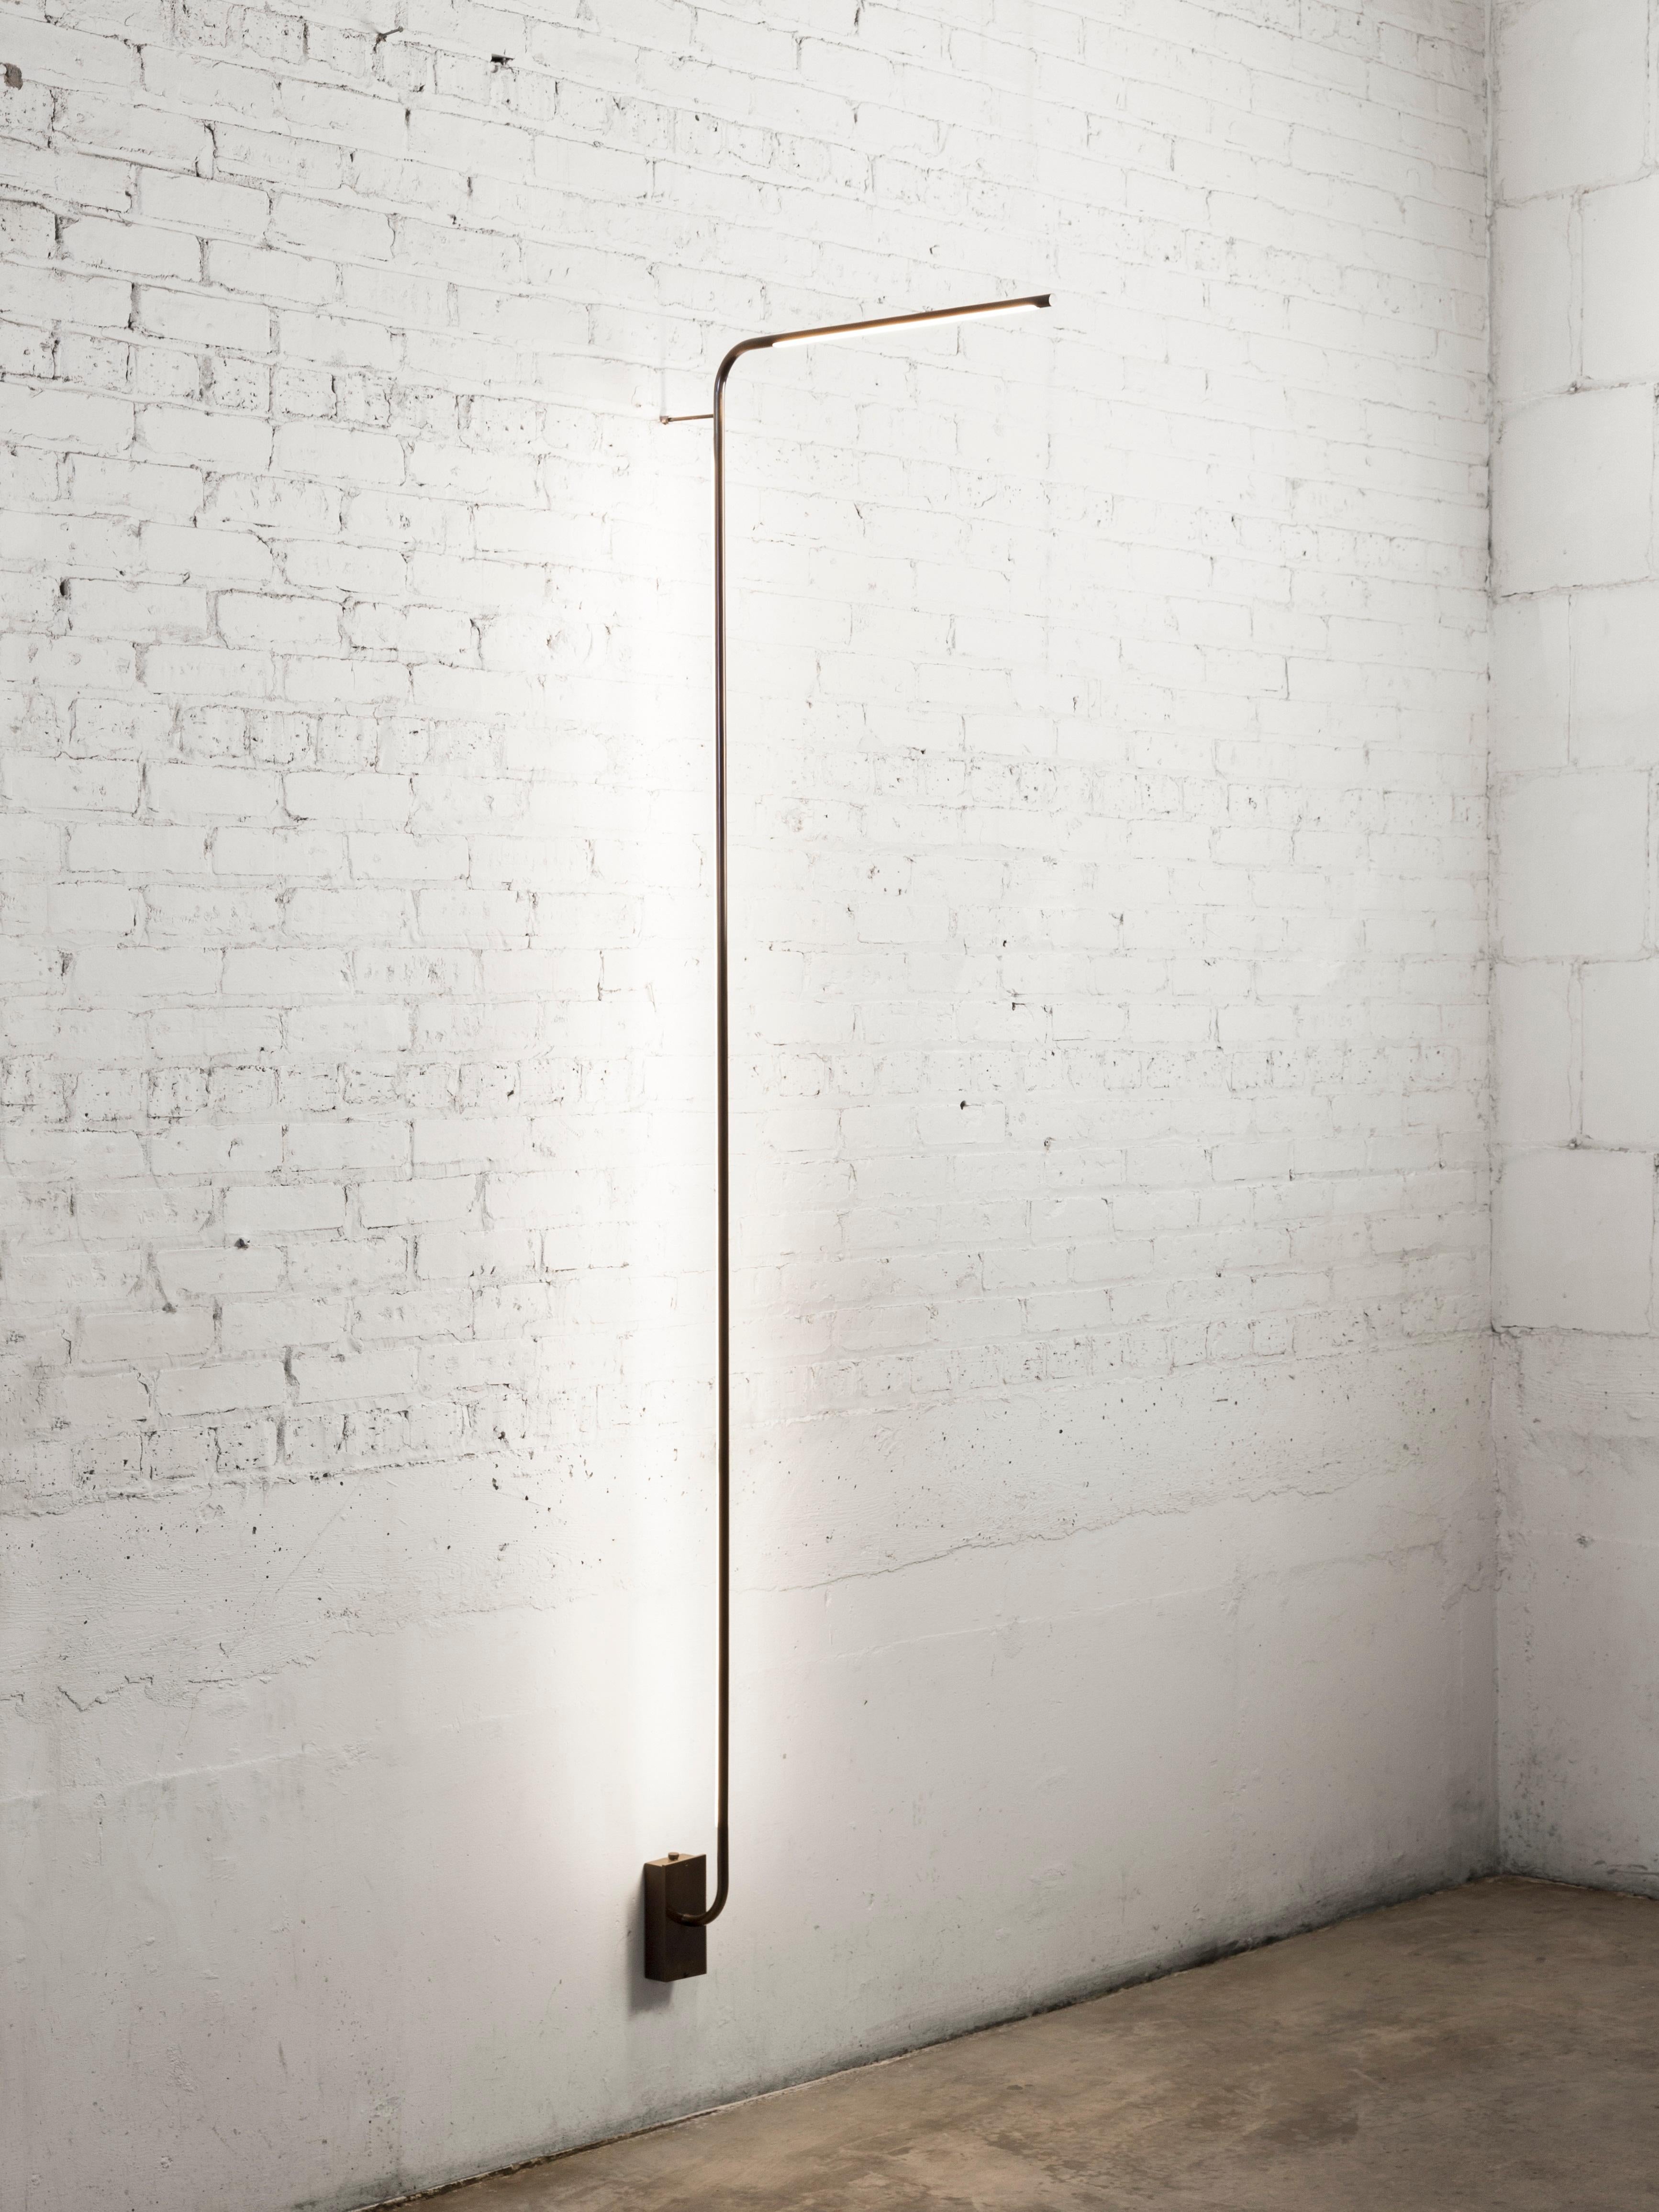 Tube brass wall lamp by Gentner Design
Dimensions: D 68.5 x W 7.5 x H 221 cm
Materials: hand rubbed brass
Available in darkened brass and hand rubbed brass.

All our lamps can be wired according to each country. If sold to the USA it will be